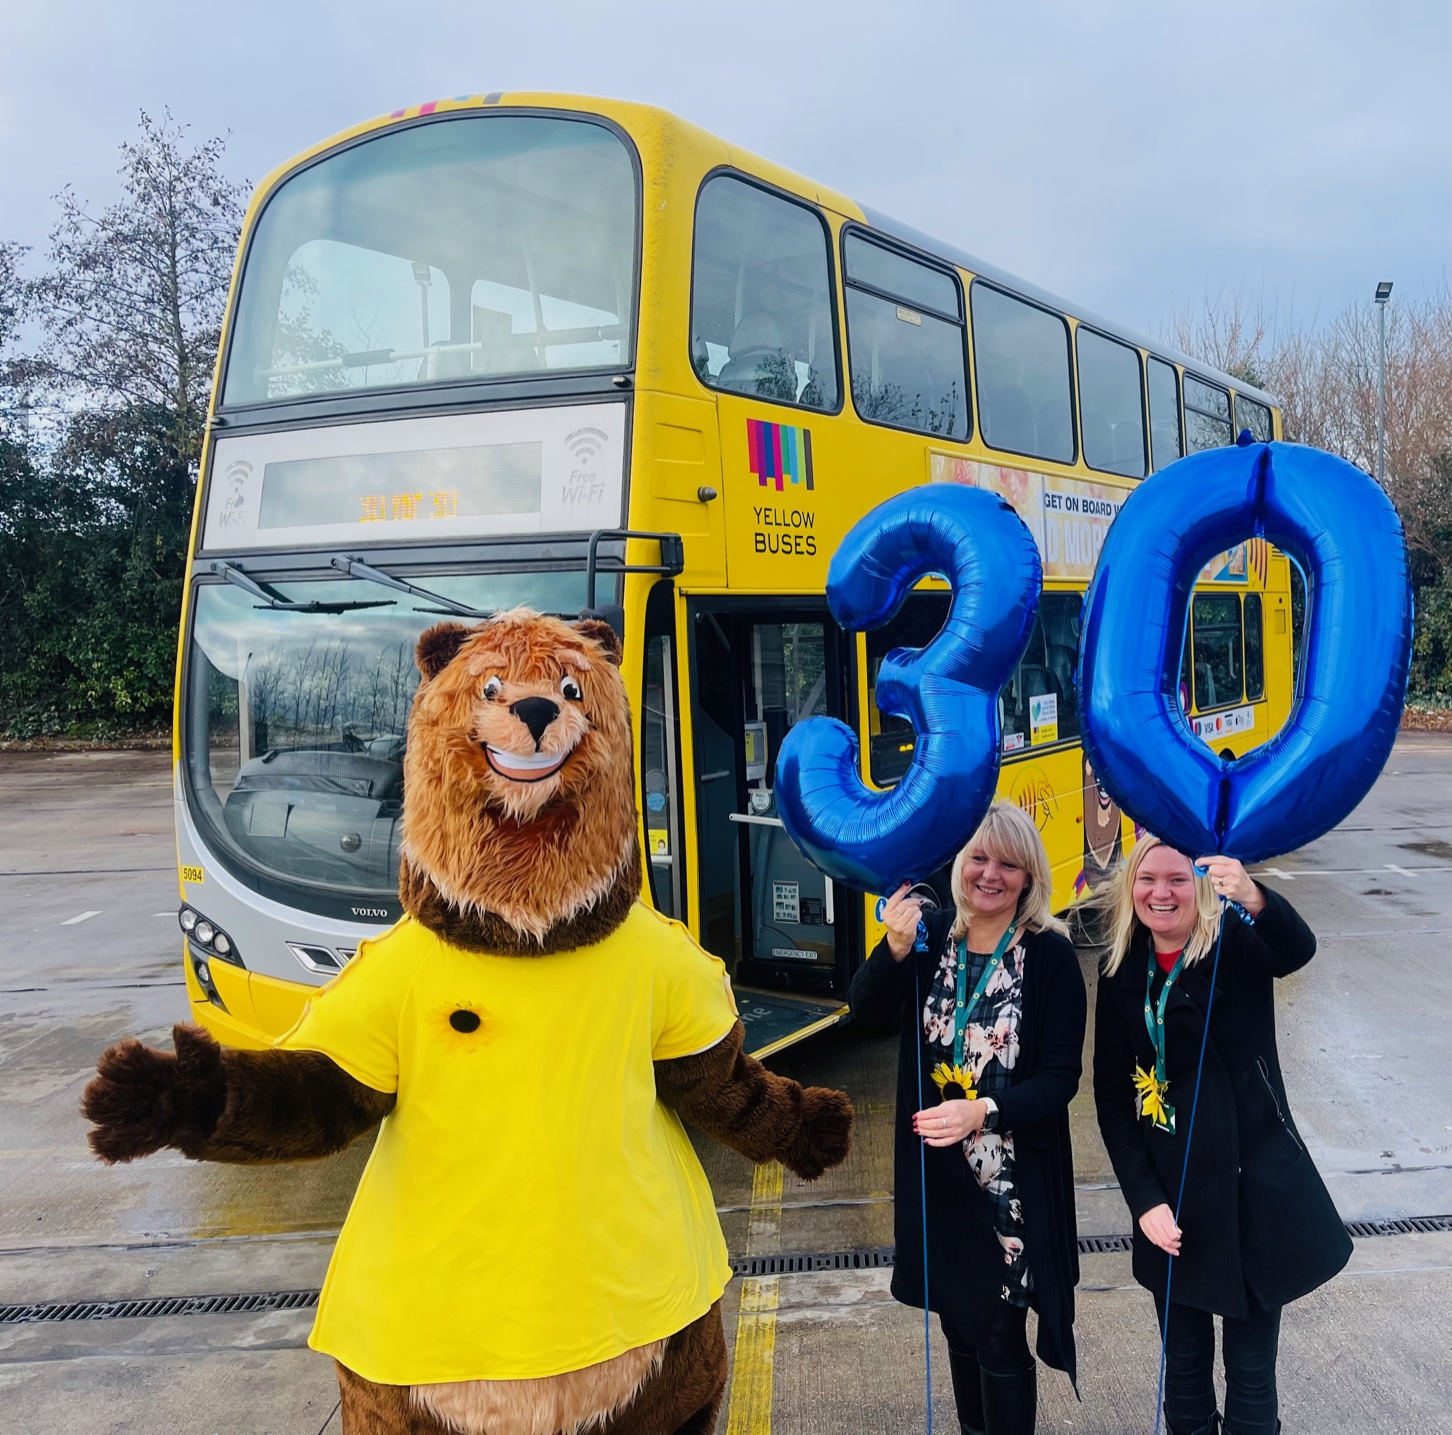 Lewis-Manning Hospice Care kicks off 30th anniversary celebrations with a bang, by launching their ’30 for 30’ campaign alongside Yellow Buses